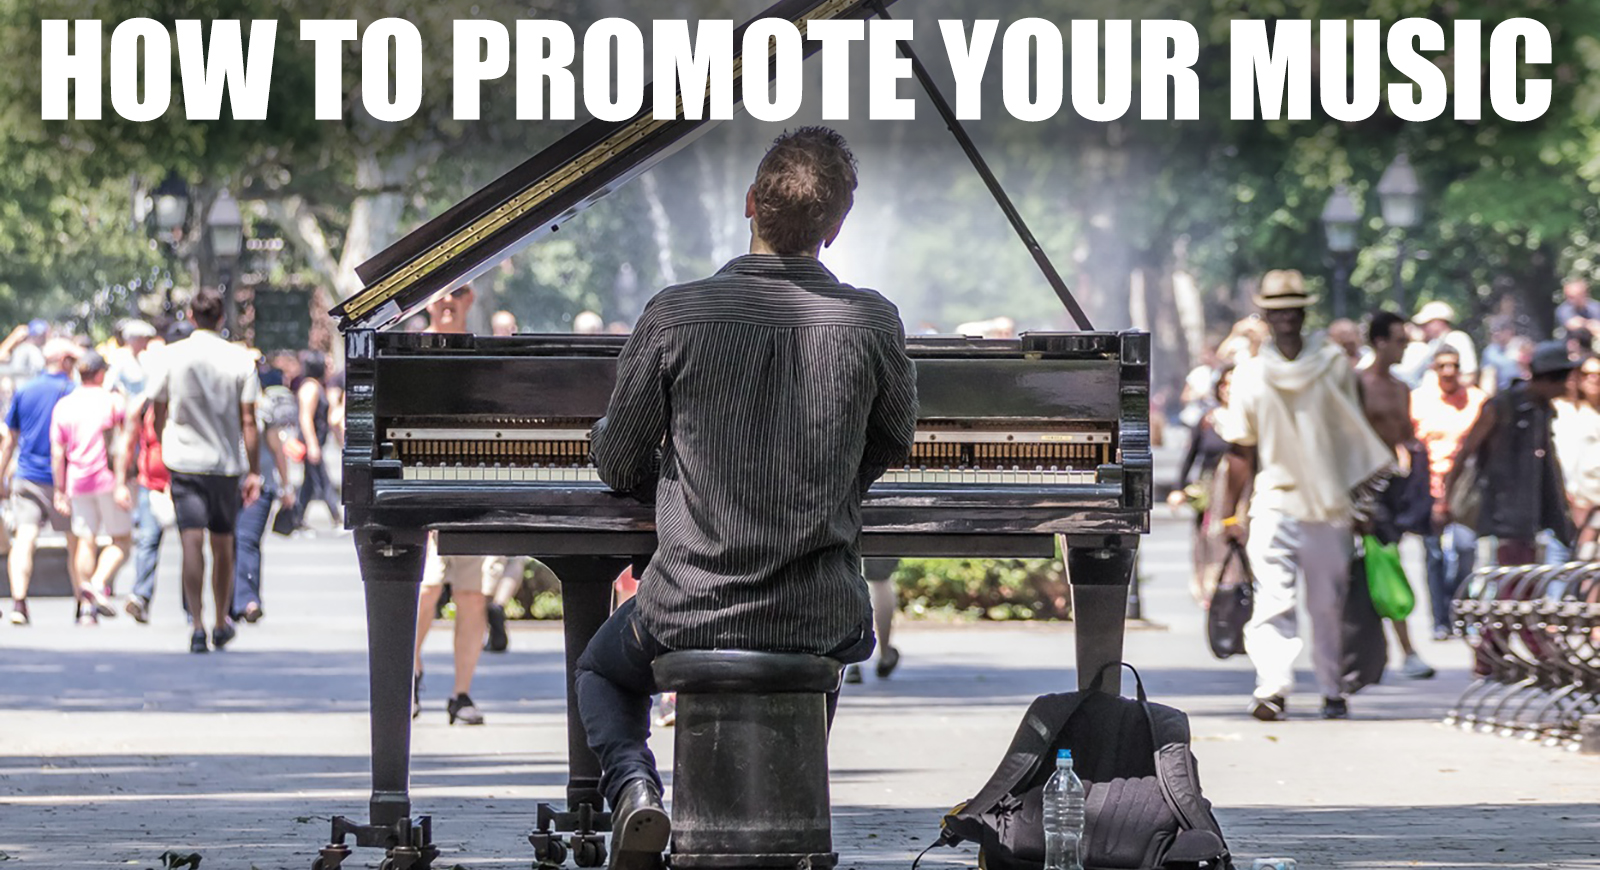 Promoting Your Music: The Top 9 Best Promotion Tips for Indie Artists